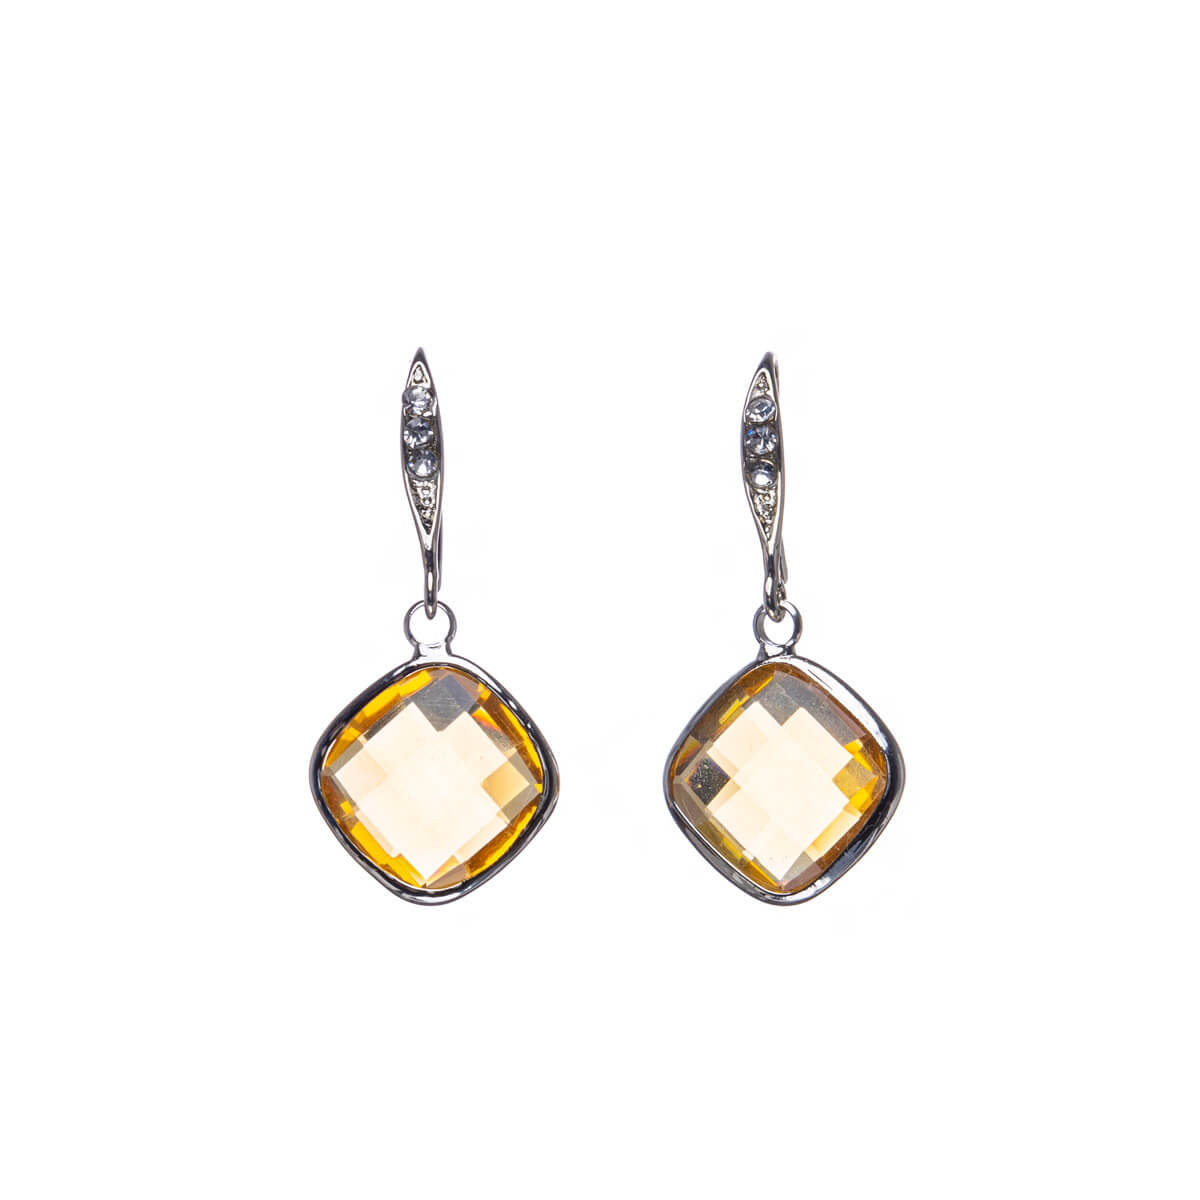 Sparkling hanging square earrings